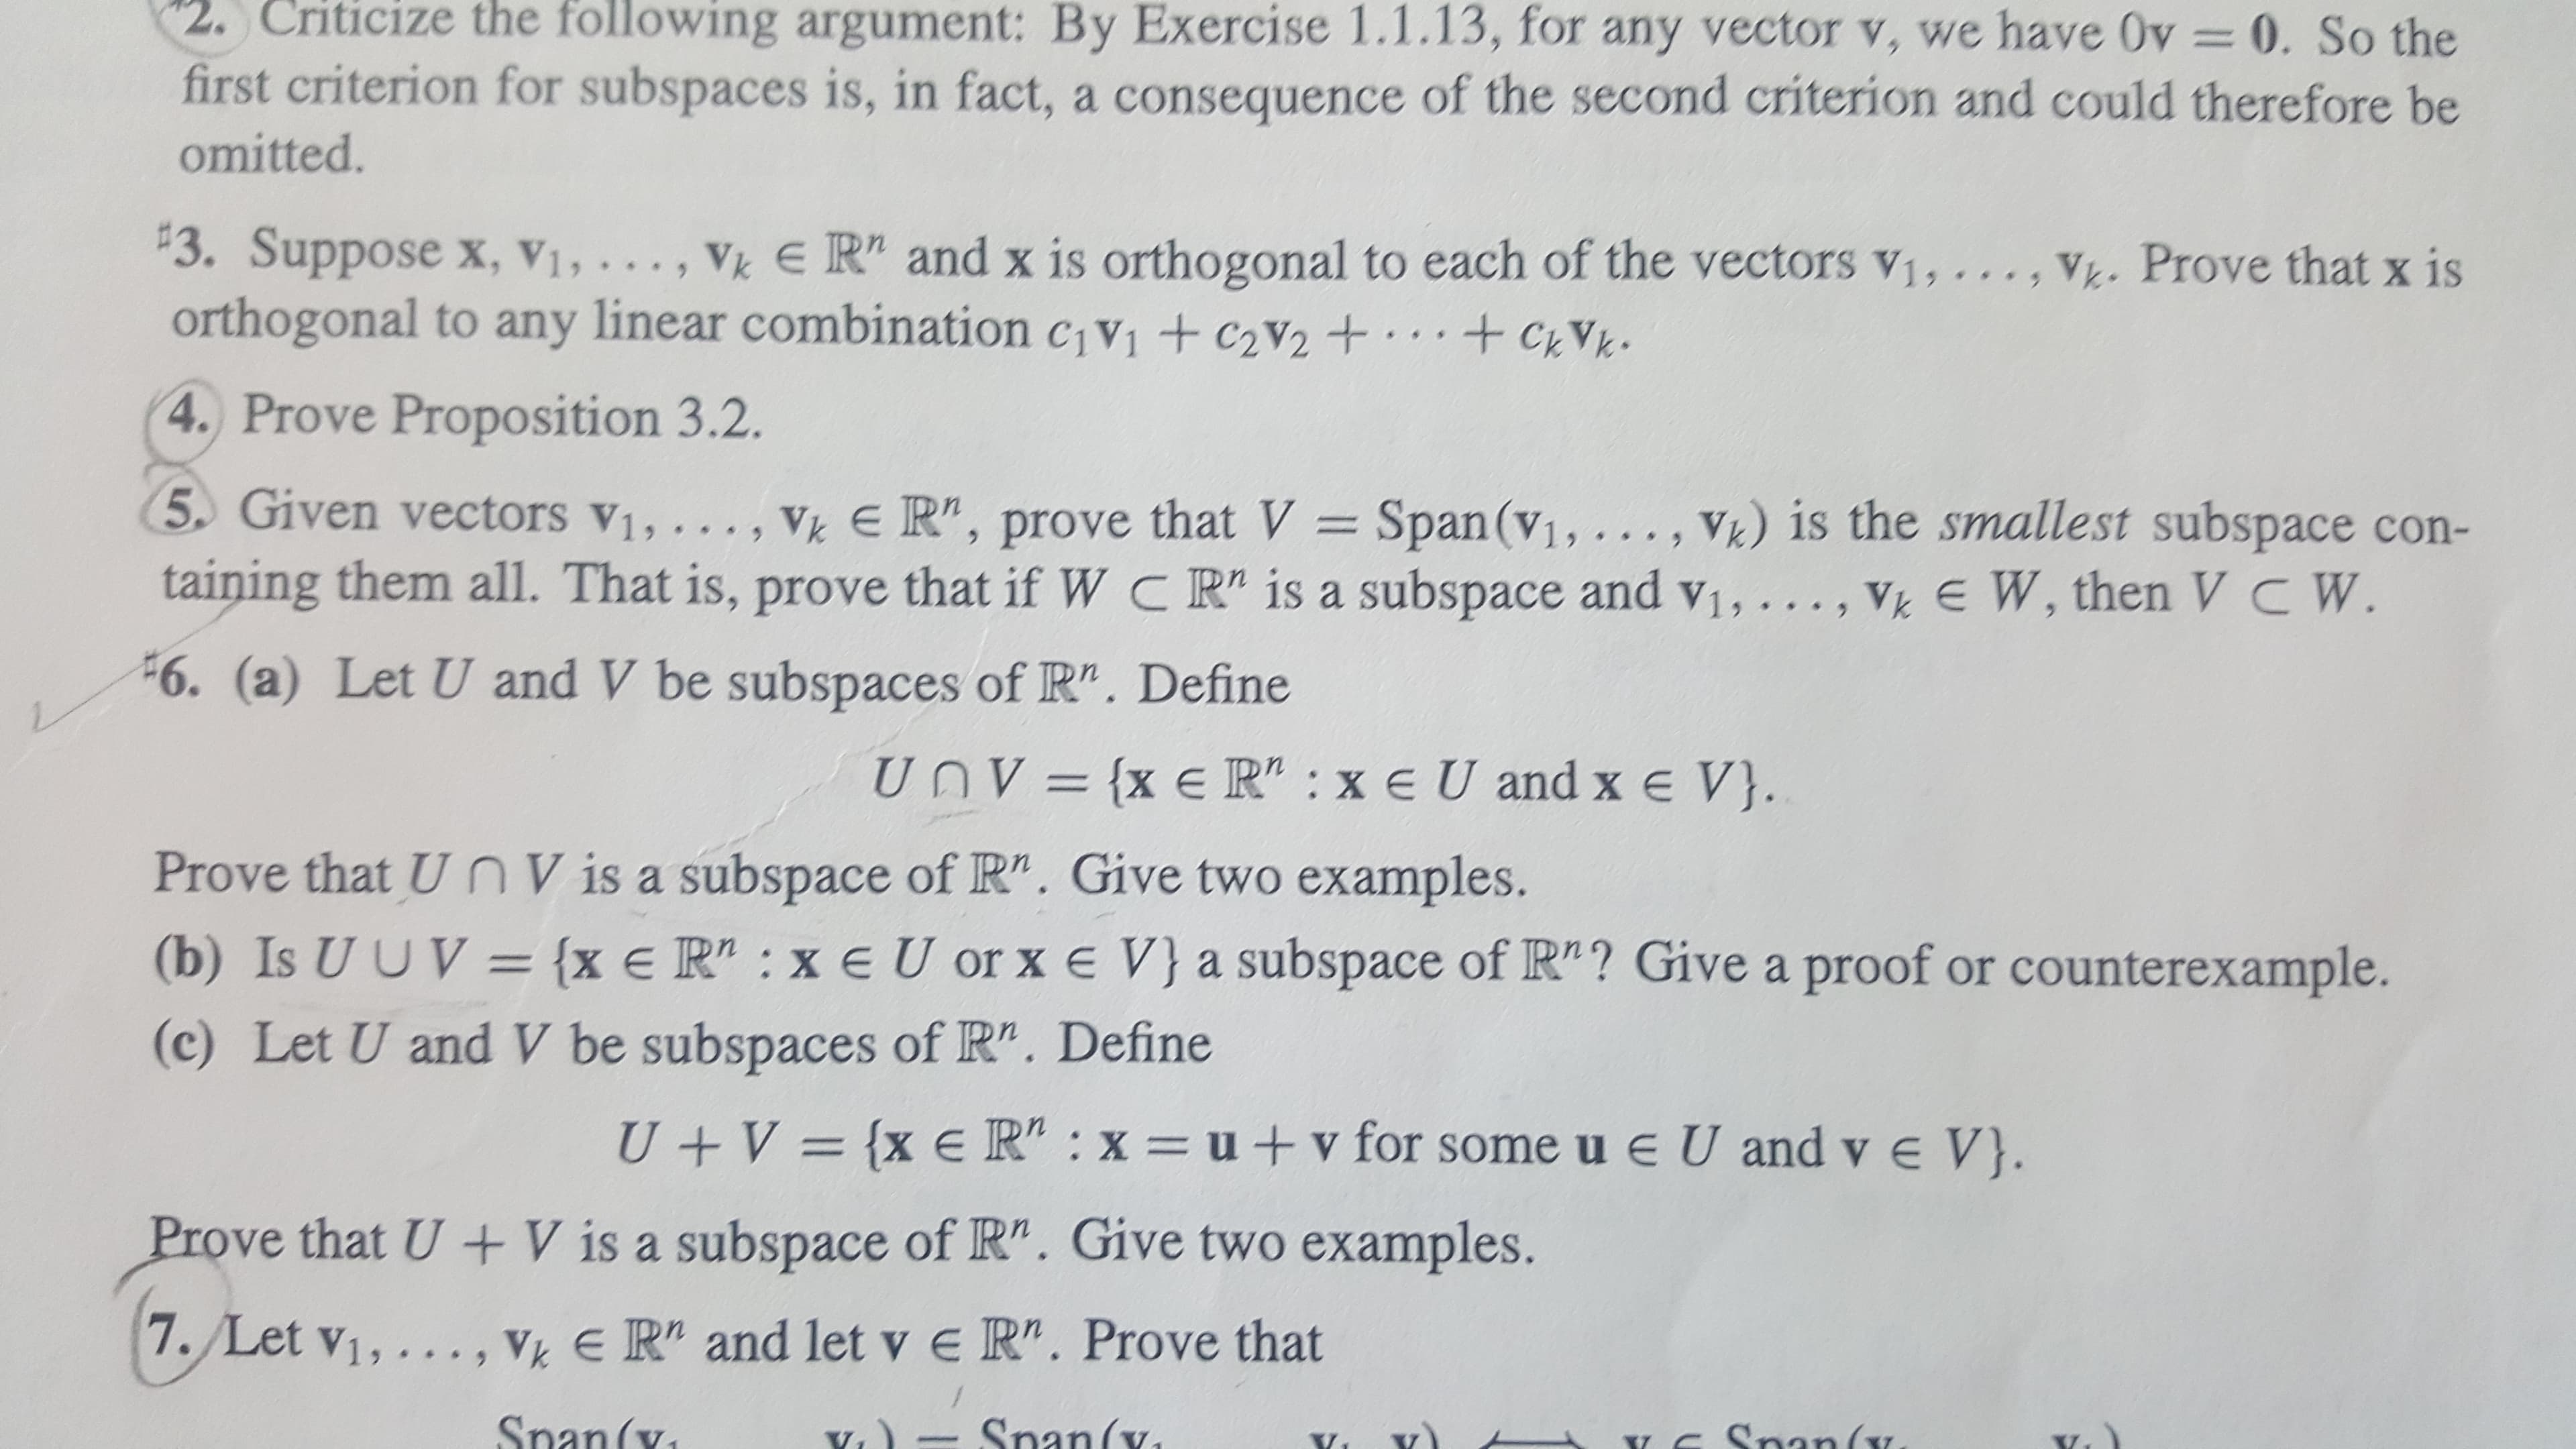 2. Criticize the following argument: By Exercise 1.1.13, for any vector v, we have Ov 0. So the
first criterion for subspaces is, in fact, a consequence of the second criterion and could therefore be
omitted.
3. Suppose x, Vi, . .,
orthogonal to any linear combination civi +C2V2 +.+
Vk E R" and x is orthogonal to each of the vectors v1,..
Vh. Prove that x is
,
CVk
s *
4. Prove Proposition 3.2.
5 Given vectors v1, ..
V) is the smallest subspace con-
Vk E R", prove that V = Span (v1, ..
taining them all. That is, prove that if W C R" is a subspace and vi, ..., Vk E W, then VC W
>
.
6. (a) Let U and V be subspaces of R". Define
UnV={x e R" : xe U and x e V}.
Prove that U nVis a subspace of R". Give two examples.
(b) Is U UV= {x e R" : x eU or x e V}a subspace of R"? Give a proof or counterexample.
(c) Let U and V be subspaces of R". Define
{x eR" : x = u + v for some u e U and v e V}.
U V
Prove that U + V is a subspace of R". Give two examples.
VkER" and let v e R". Prove that
7. Let v1, ... ,
Snan(v
Snan(v
(x
Sna
Y
